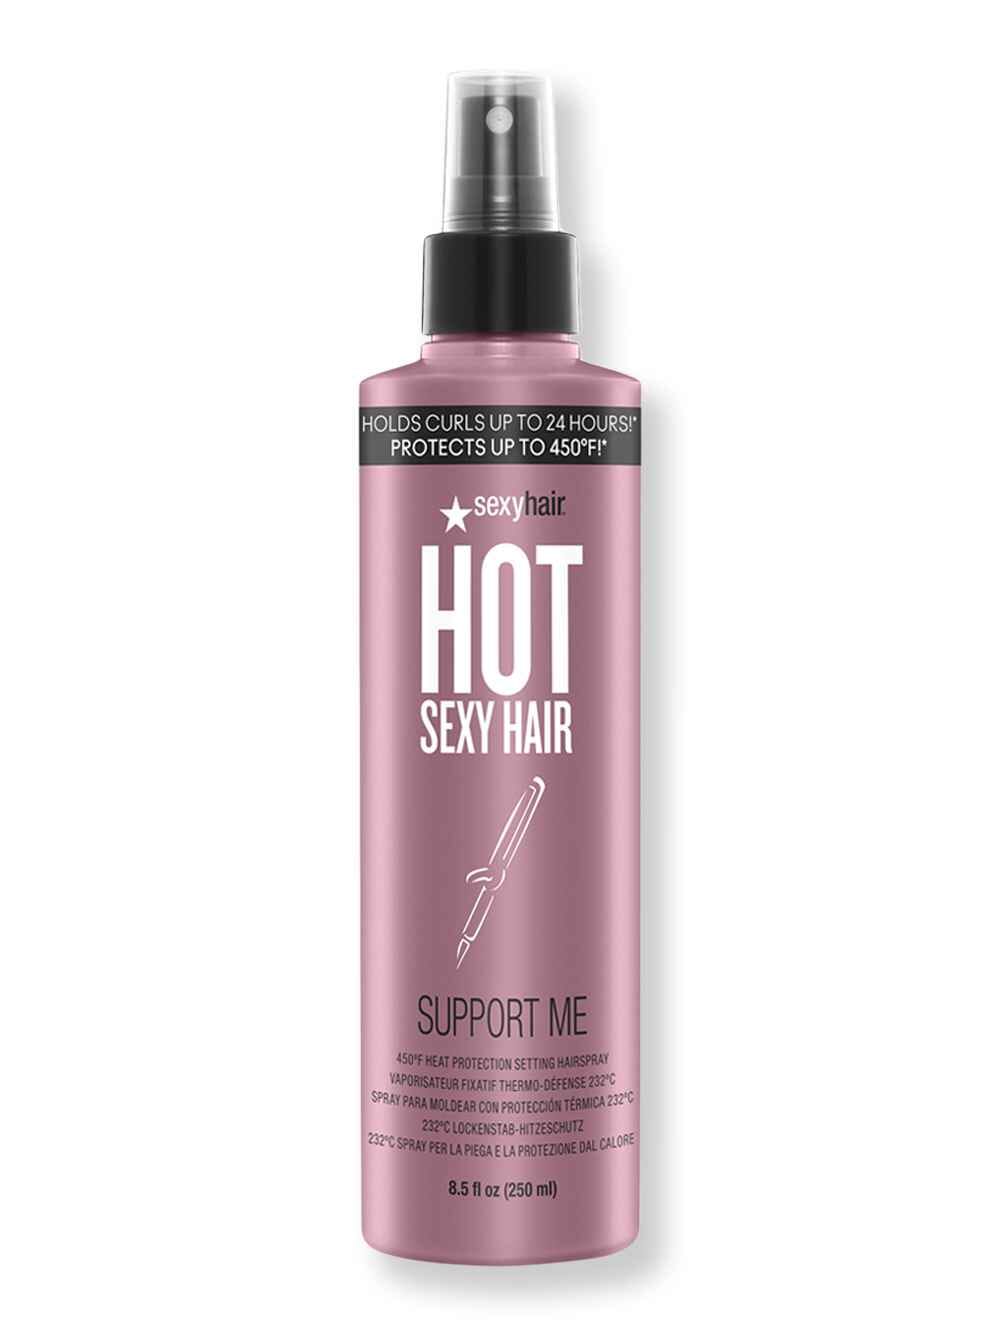 Sexy Hair Sexy Hair Hot Sexy Hair Support Me 450 Heat Protection Setting Hairspray 8.5 oz250 ml Styling Treatments 